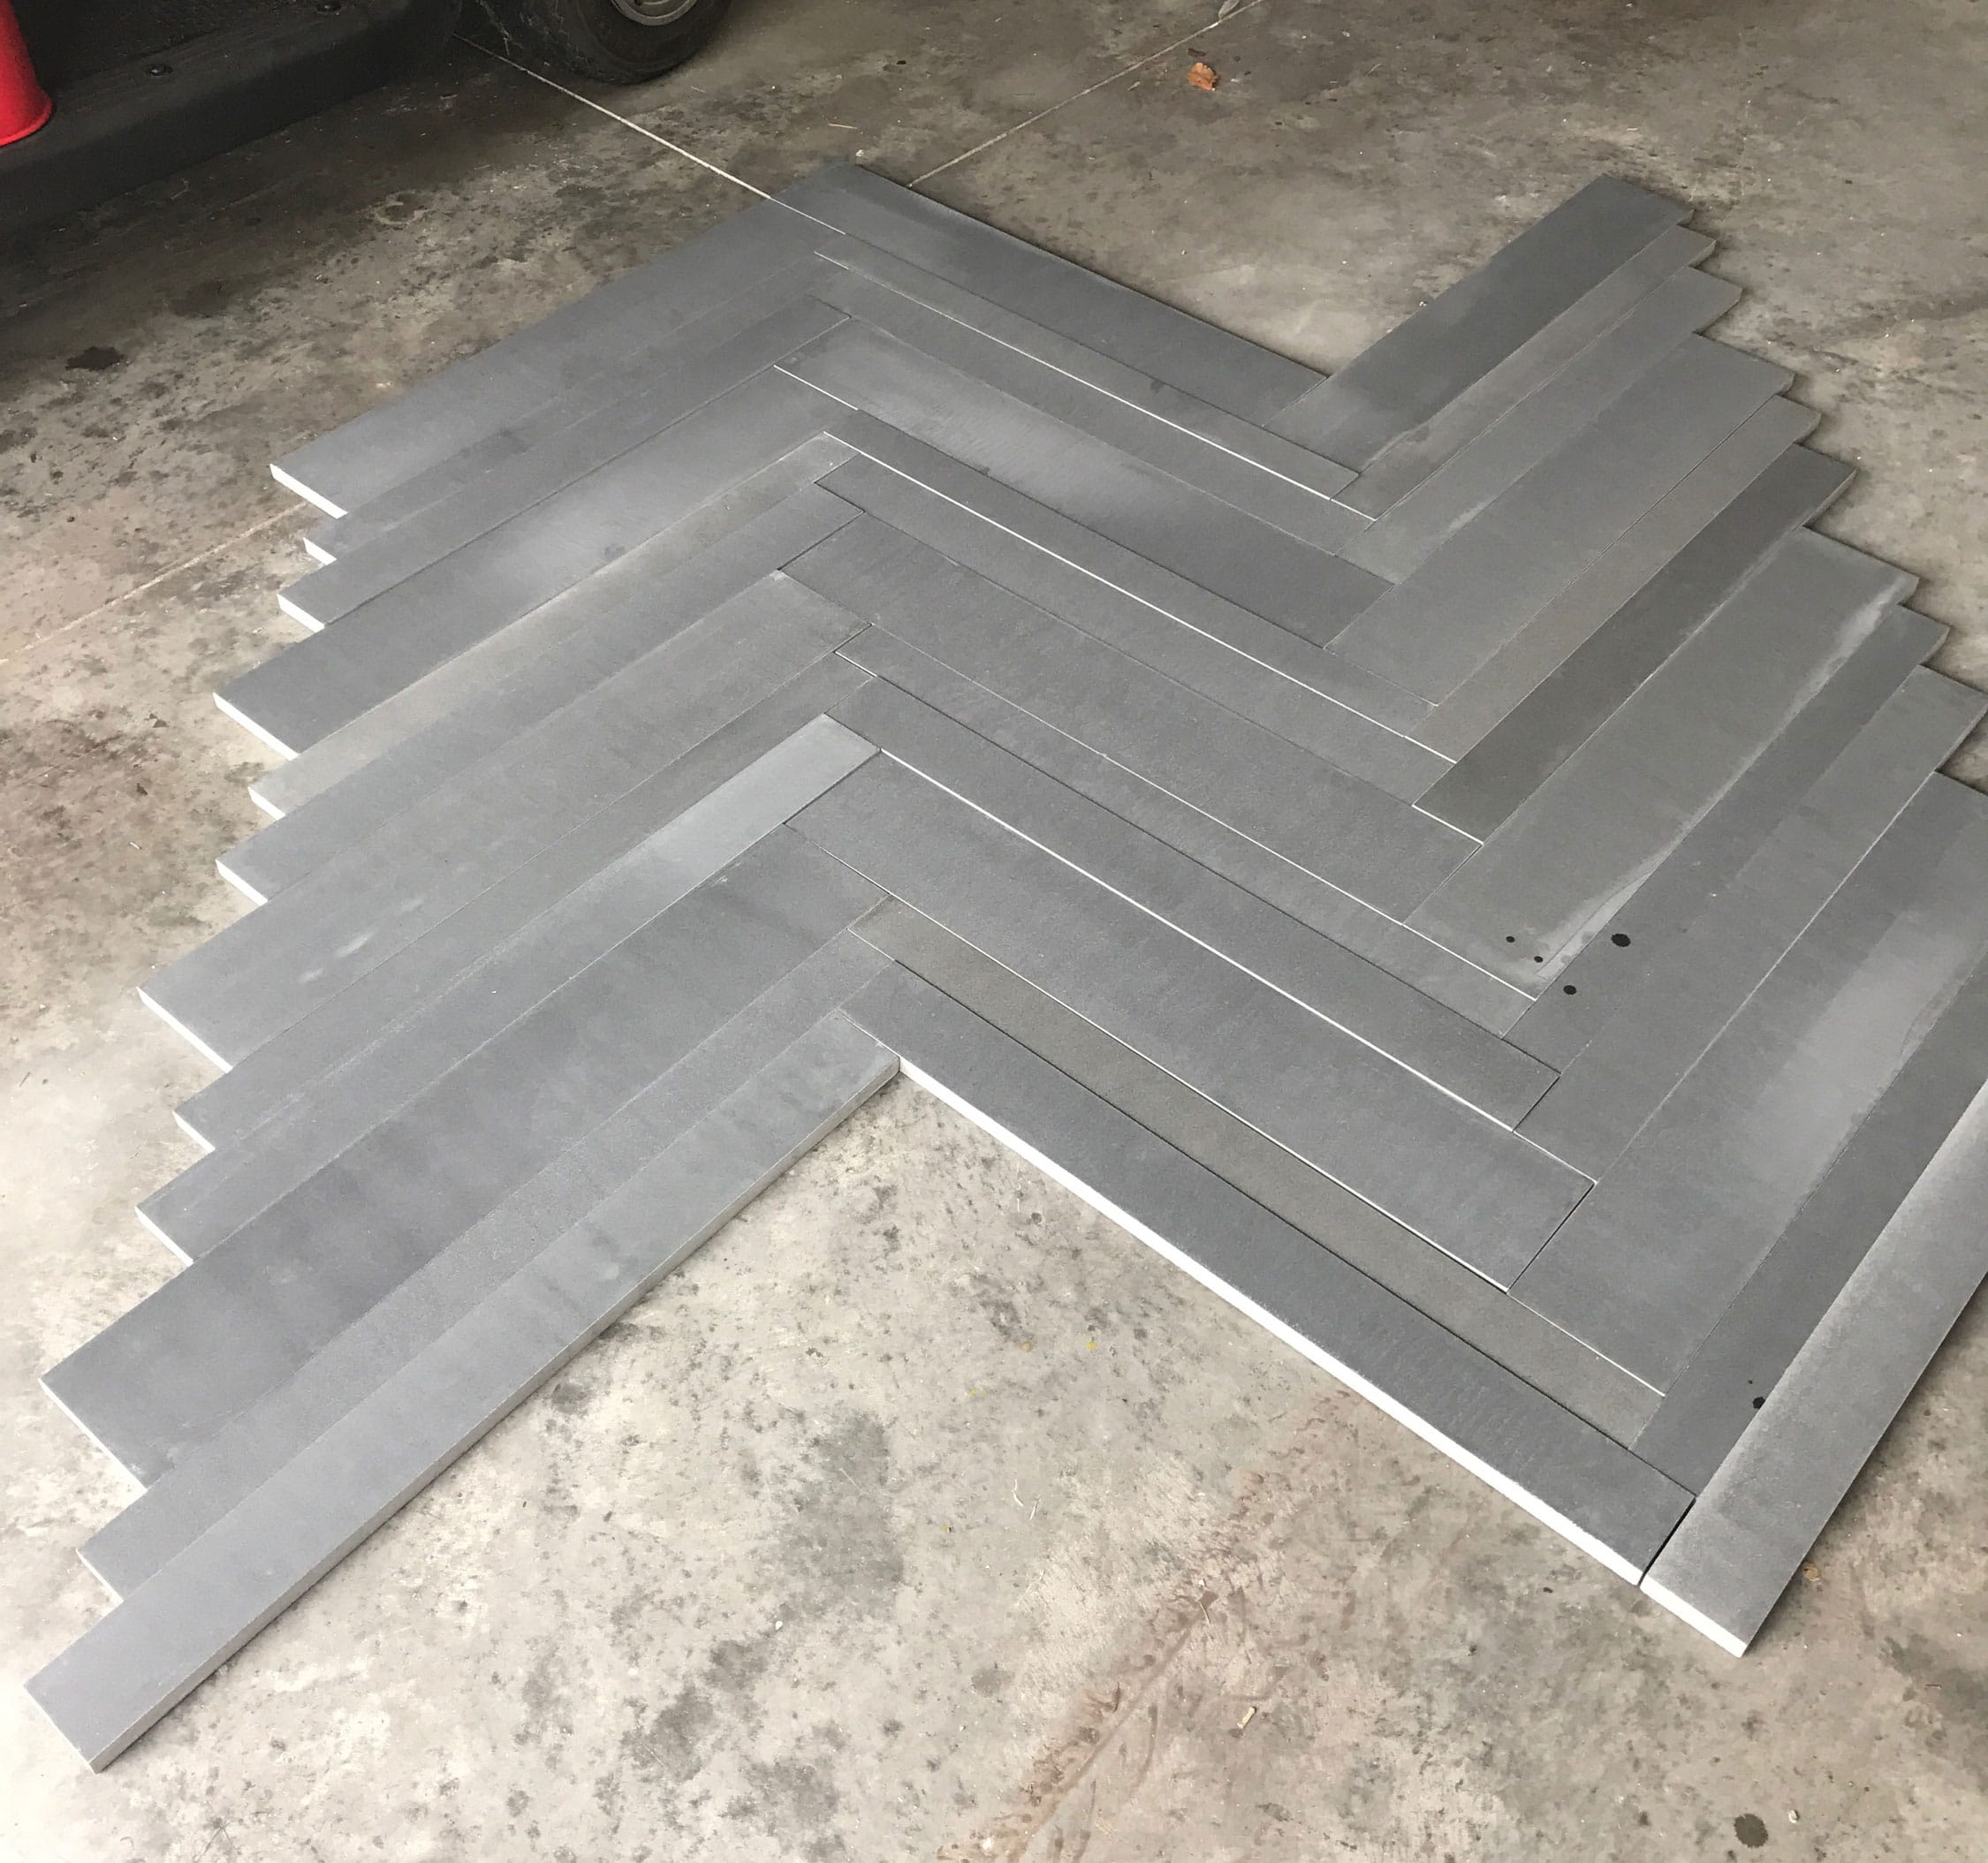 Norstone Planc Large Format Tile shown laid out in a Herringbone pattern